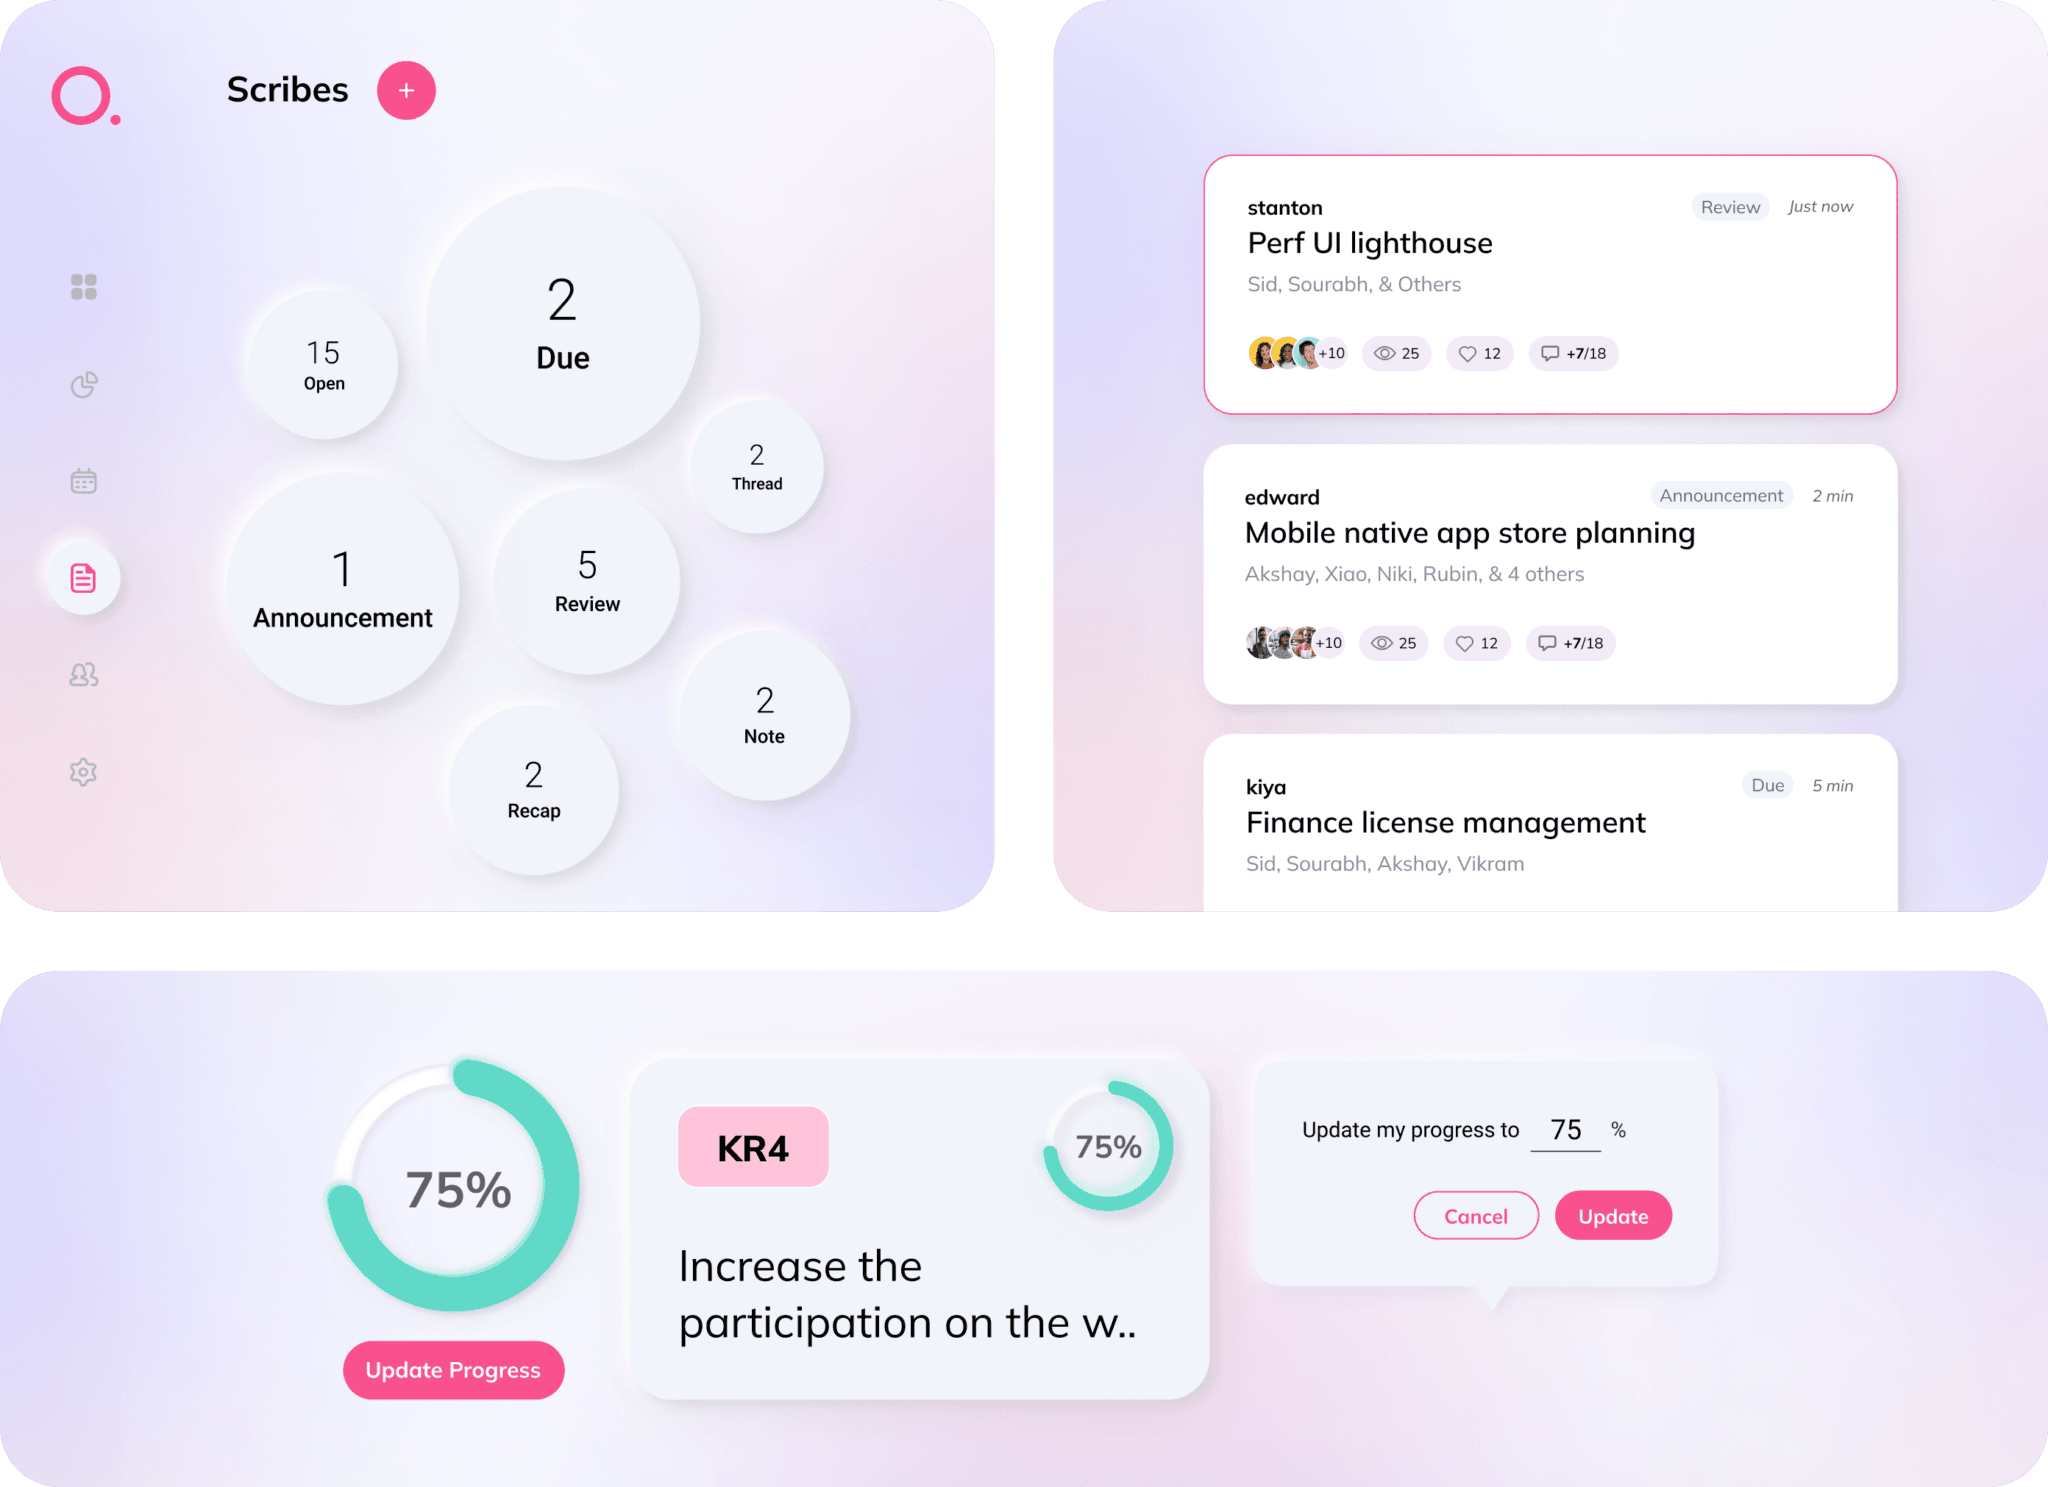 Exploration of neumorphic theme for the UI to give a three-dimensional, realistic effect but with a minimalist focus.